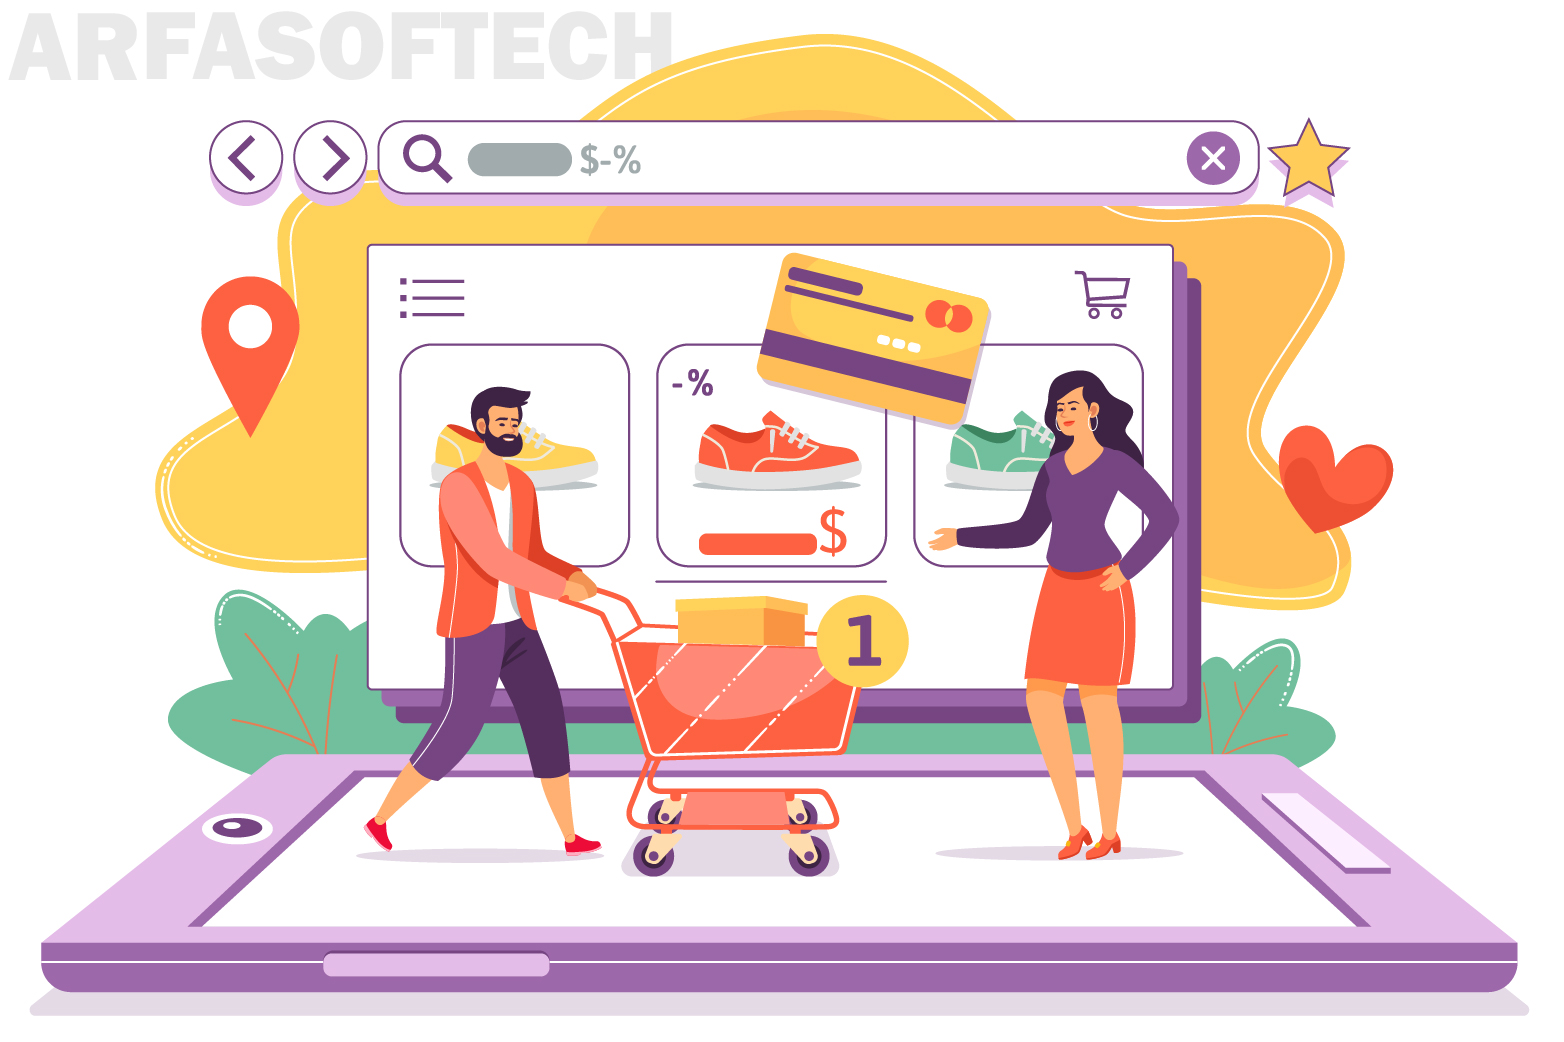 Why eCommerce Success in 2022?